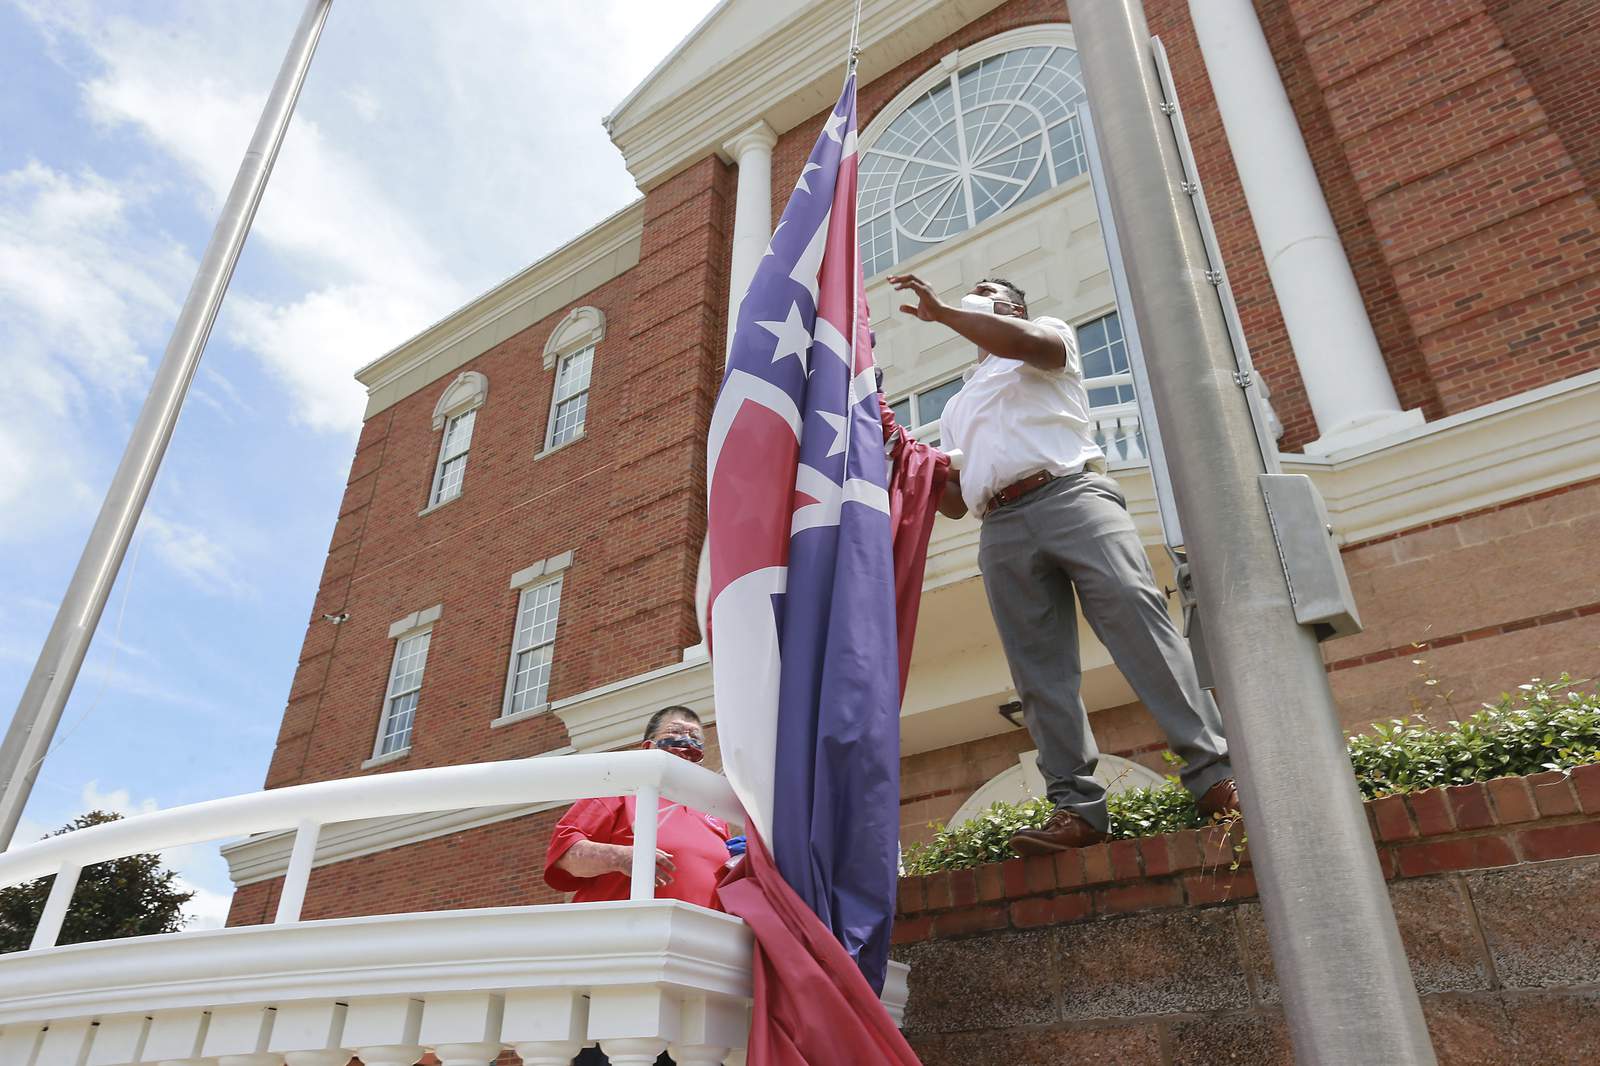 Winds of change: Mississippi rebel-themed flag fading away